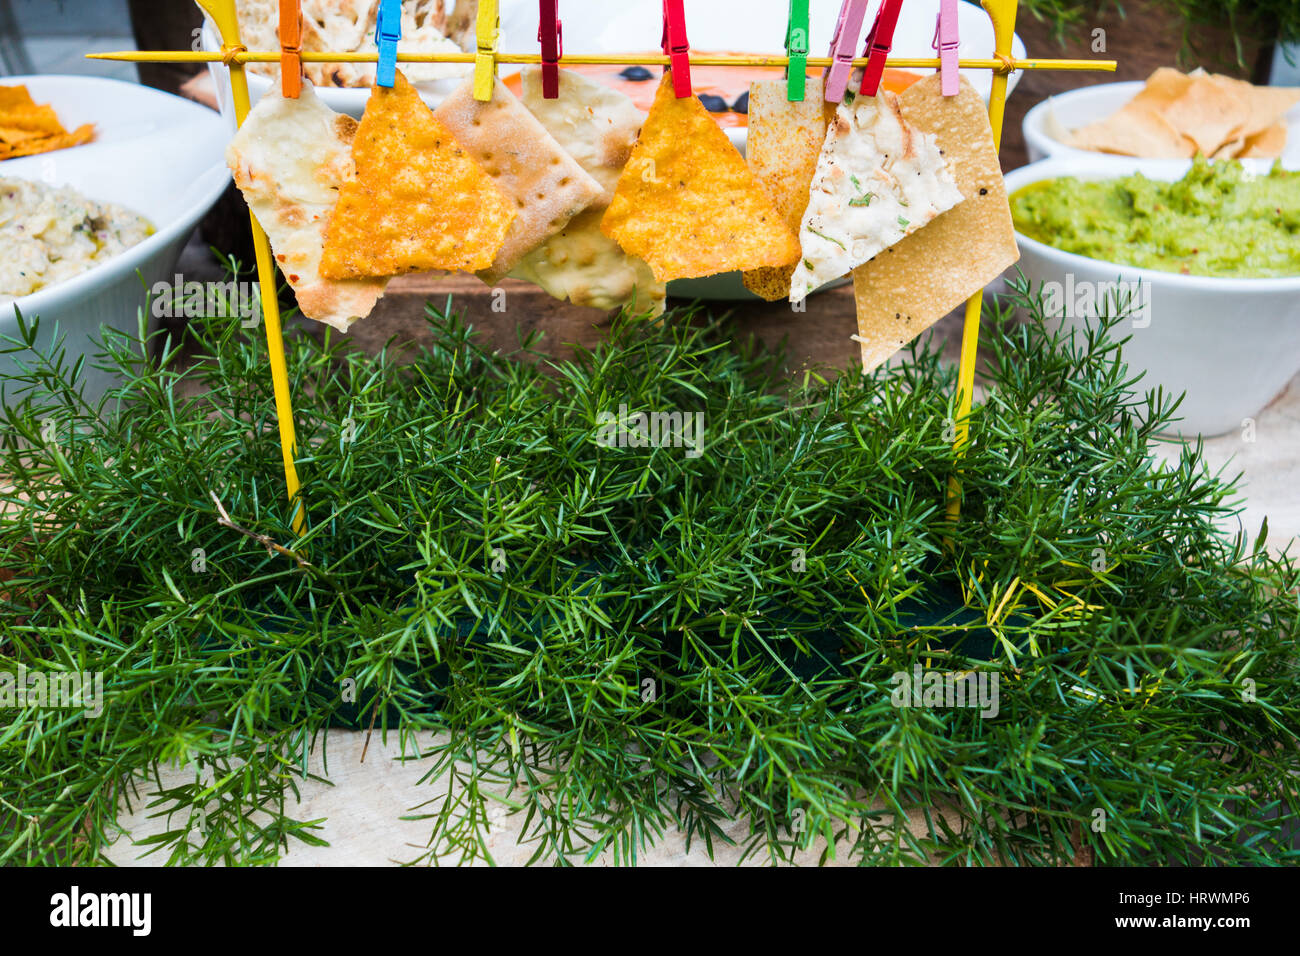 Creative food styling of nachos and flat bread hung using colored clips Stock Photo